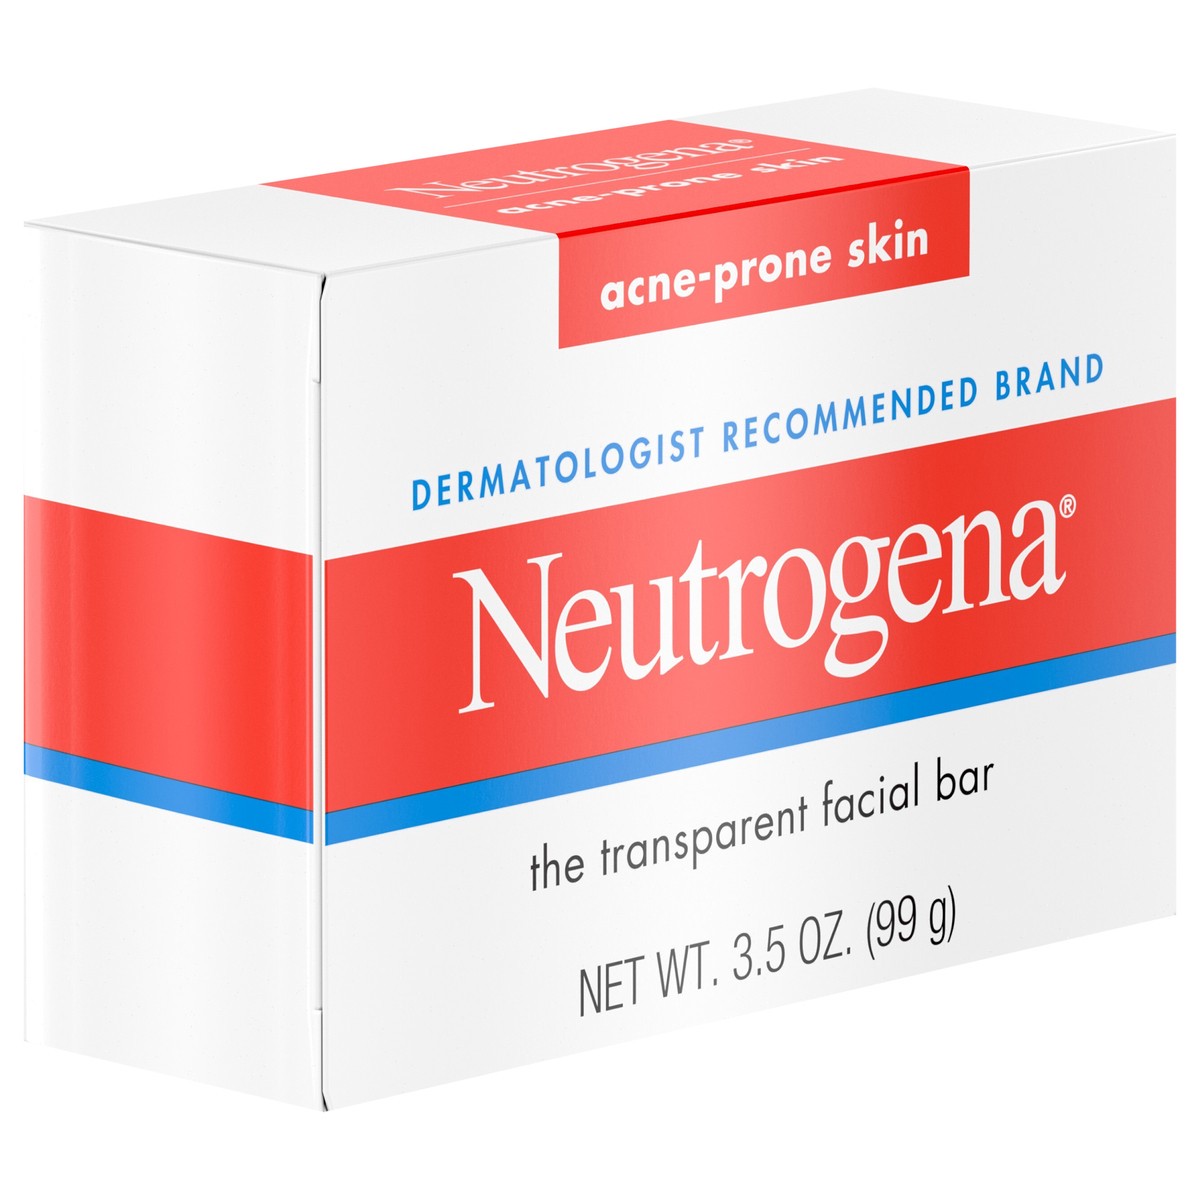 slide 2 of 8, Neutrogena Facial Cleansing Bar Treatment for Acne-Prone Skin, Non-Medicated & Glycerin-Rich Formula Gently Cleanses without Over-Drying, No Detergents or Dyes, Non-Comedogenic, 3.5 oz, 3.5 oz